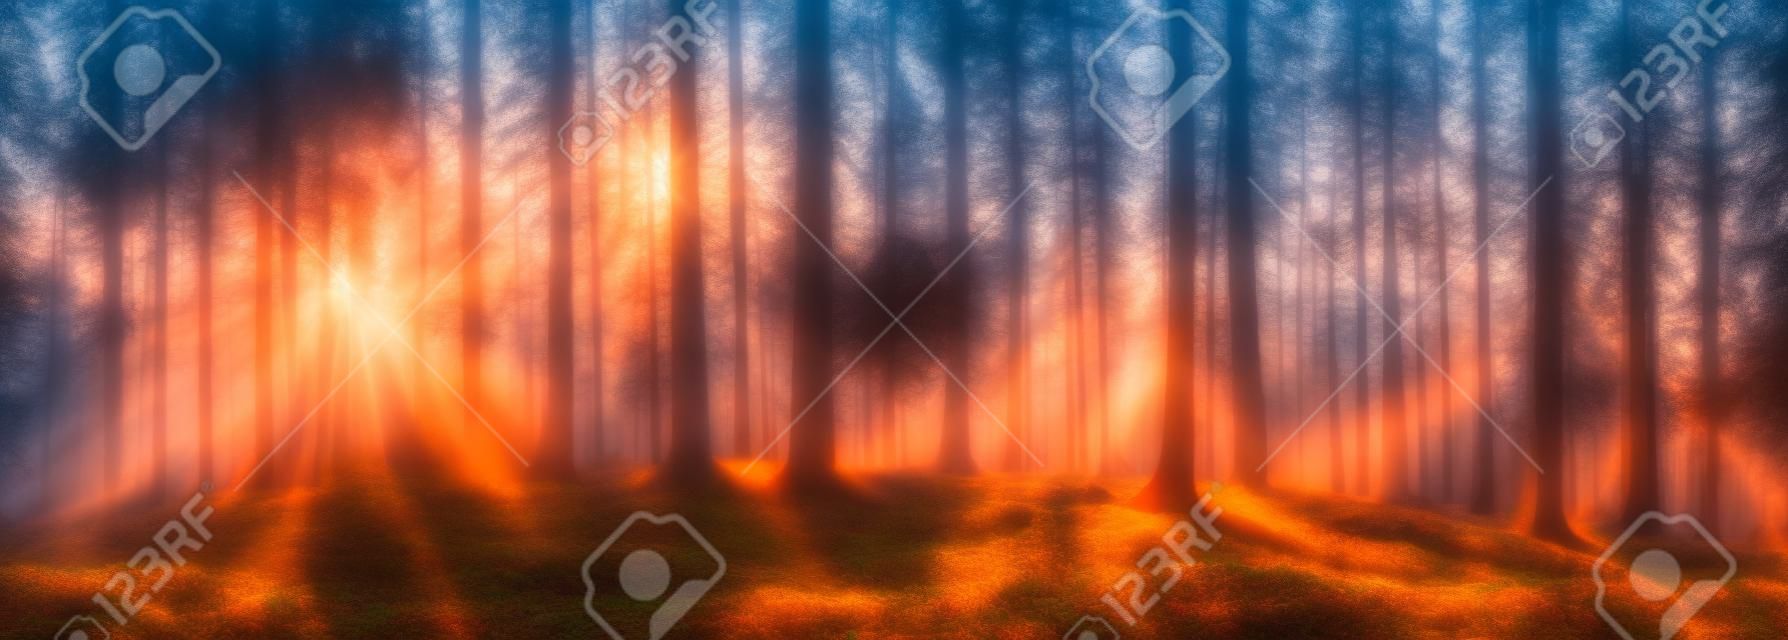 Sunrise in a forest